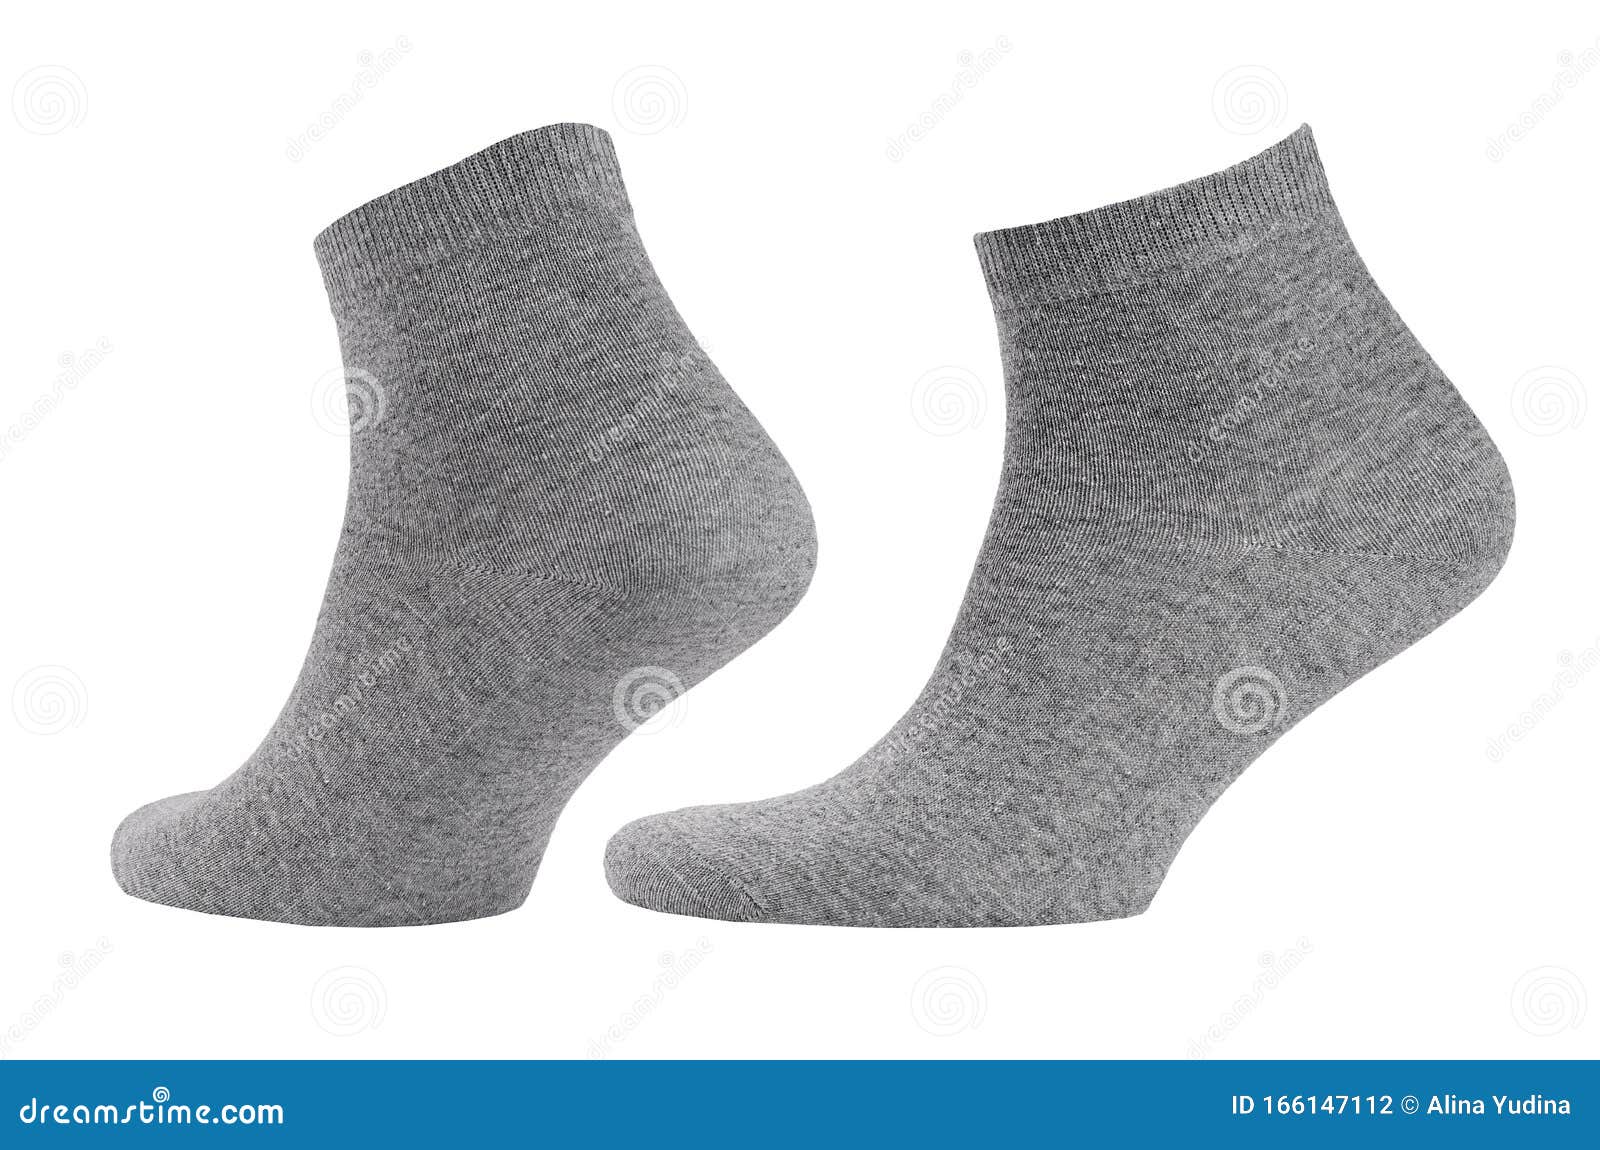 Blank Grey Cotton Medium Socks on Invisible Foot Isolated on White ...